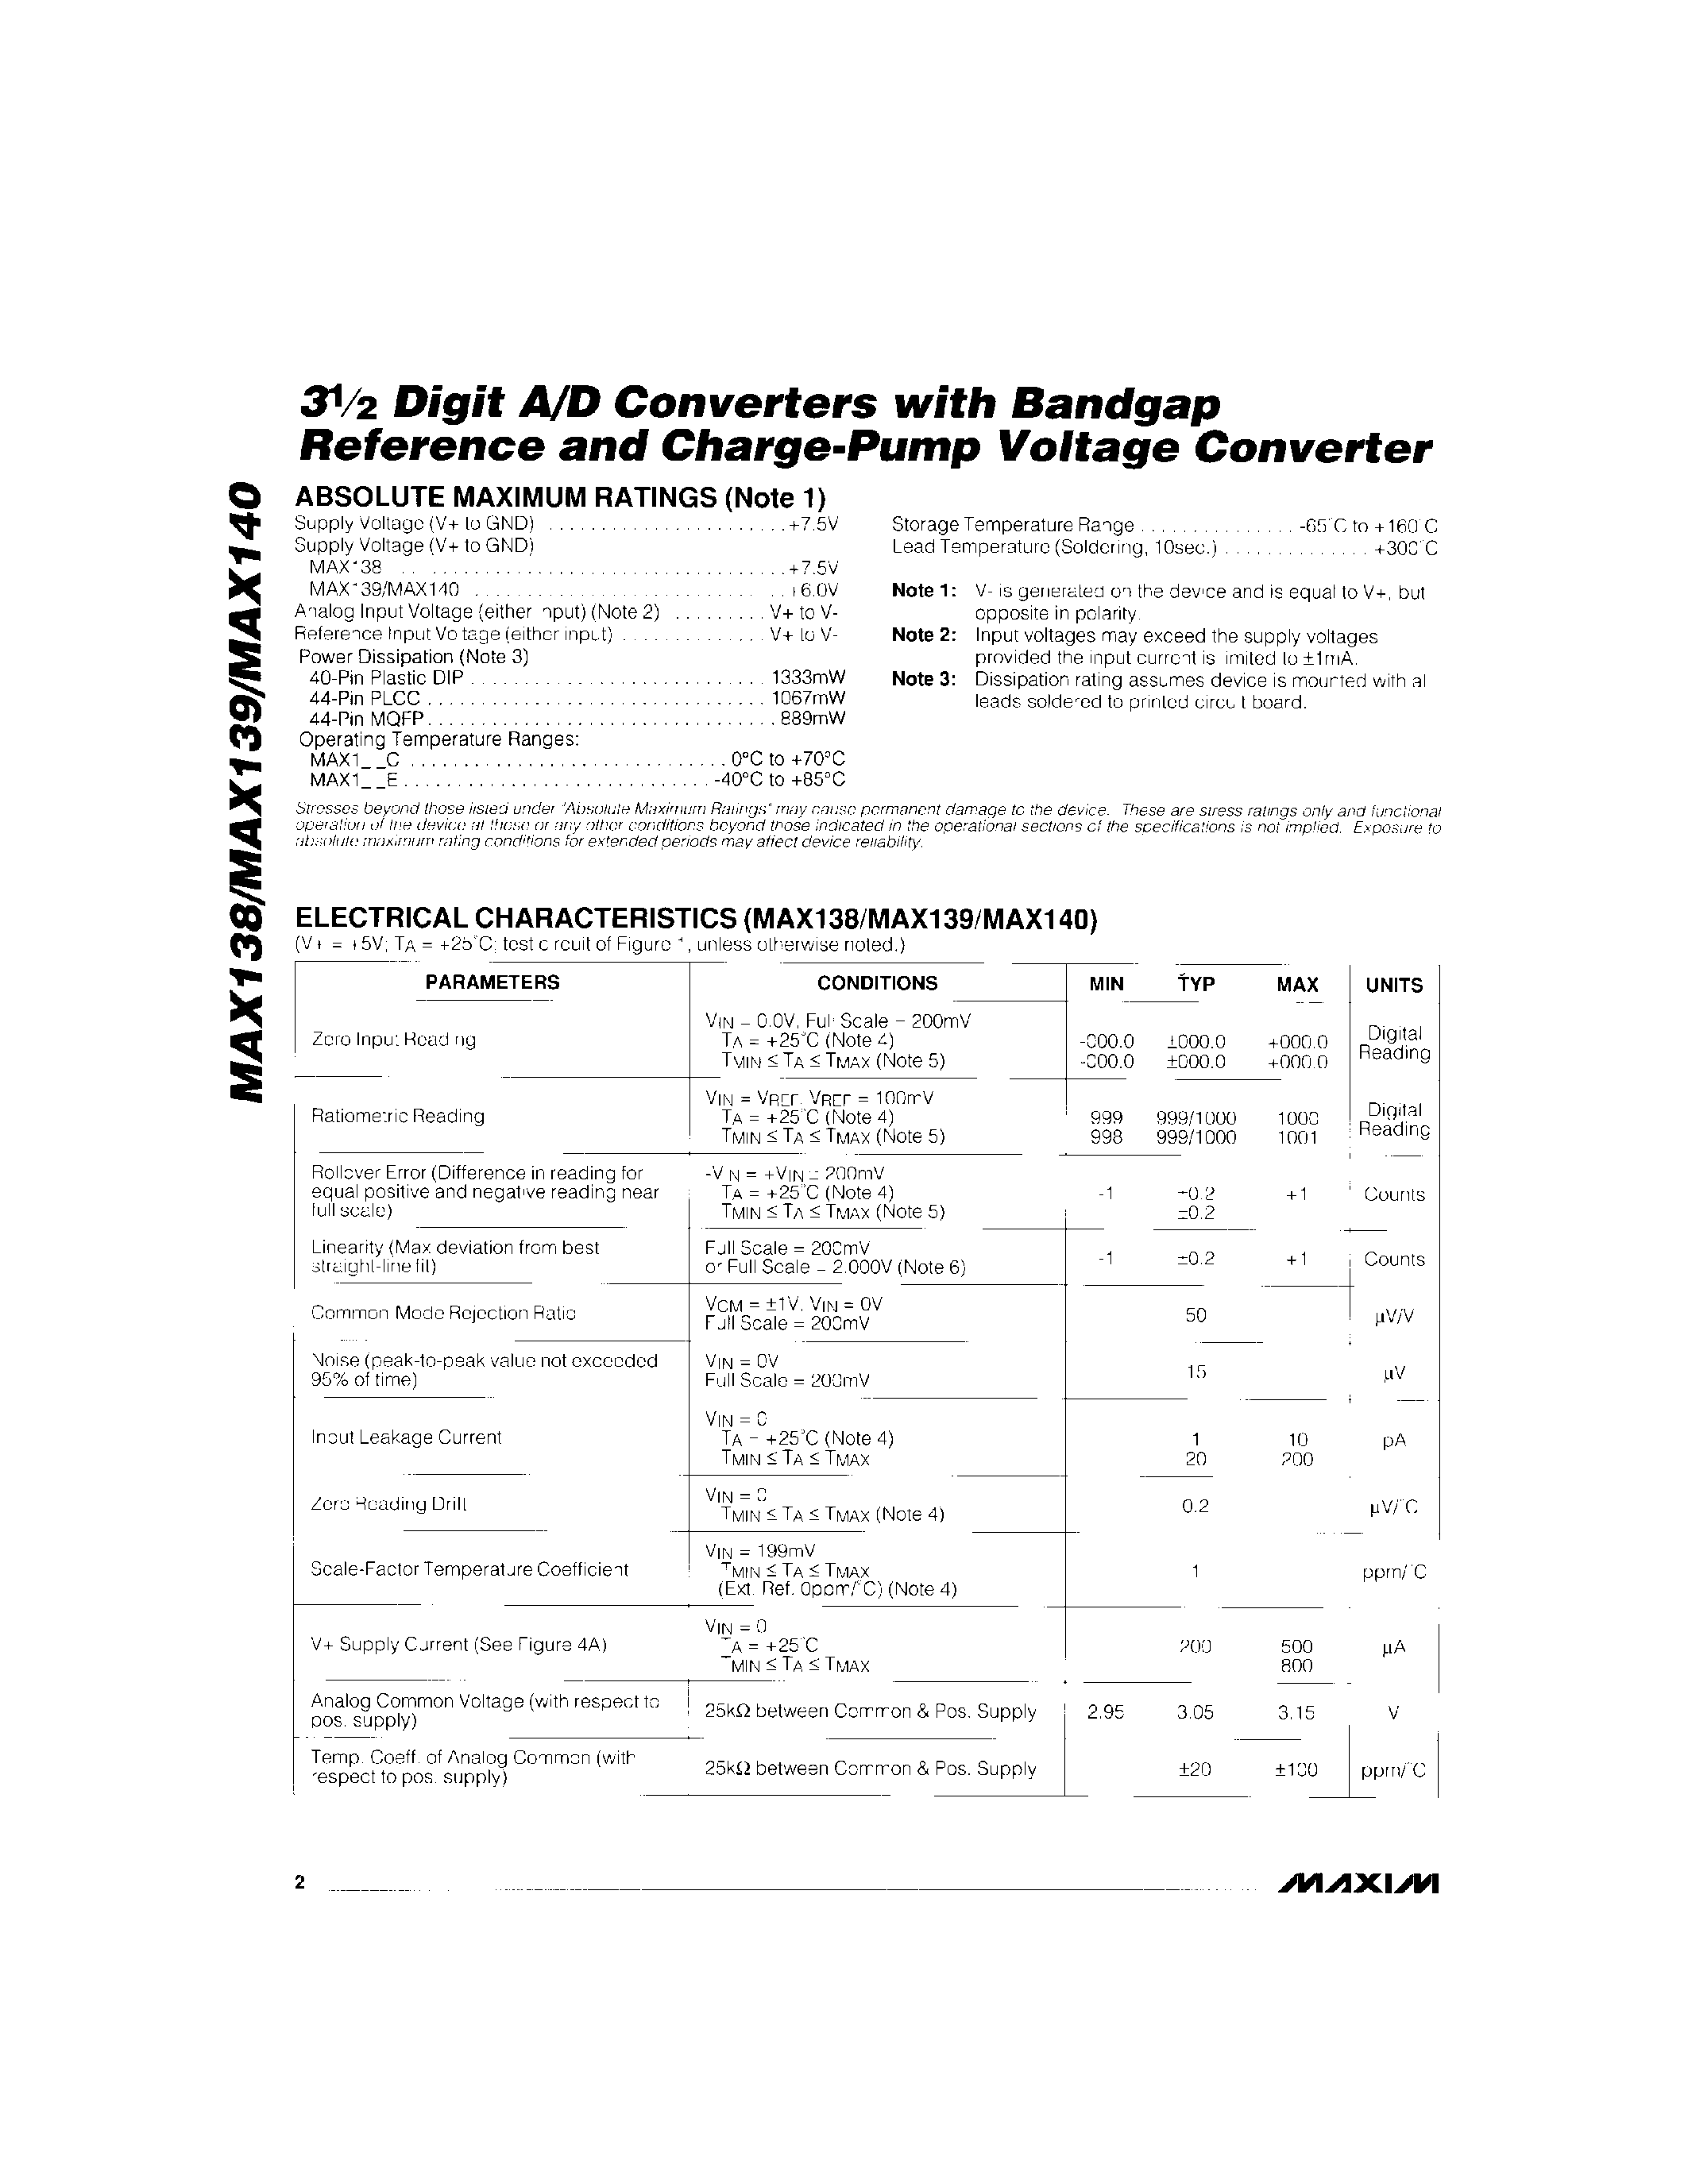 Datasheet MAX138-MAX140 - 3Digit A/D Converters with Bandgap Refrence and Charge-Pump Voltage Converter page 2